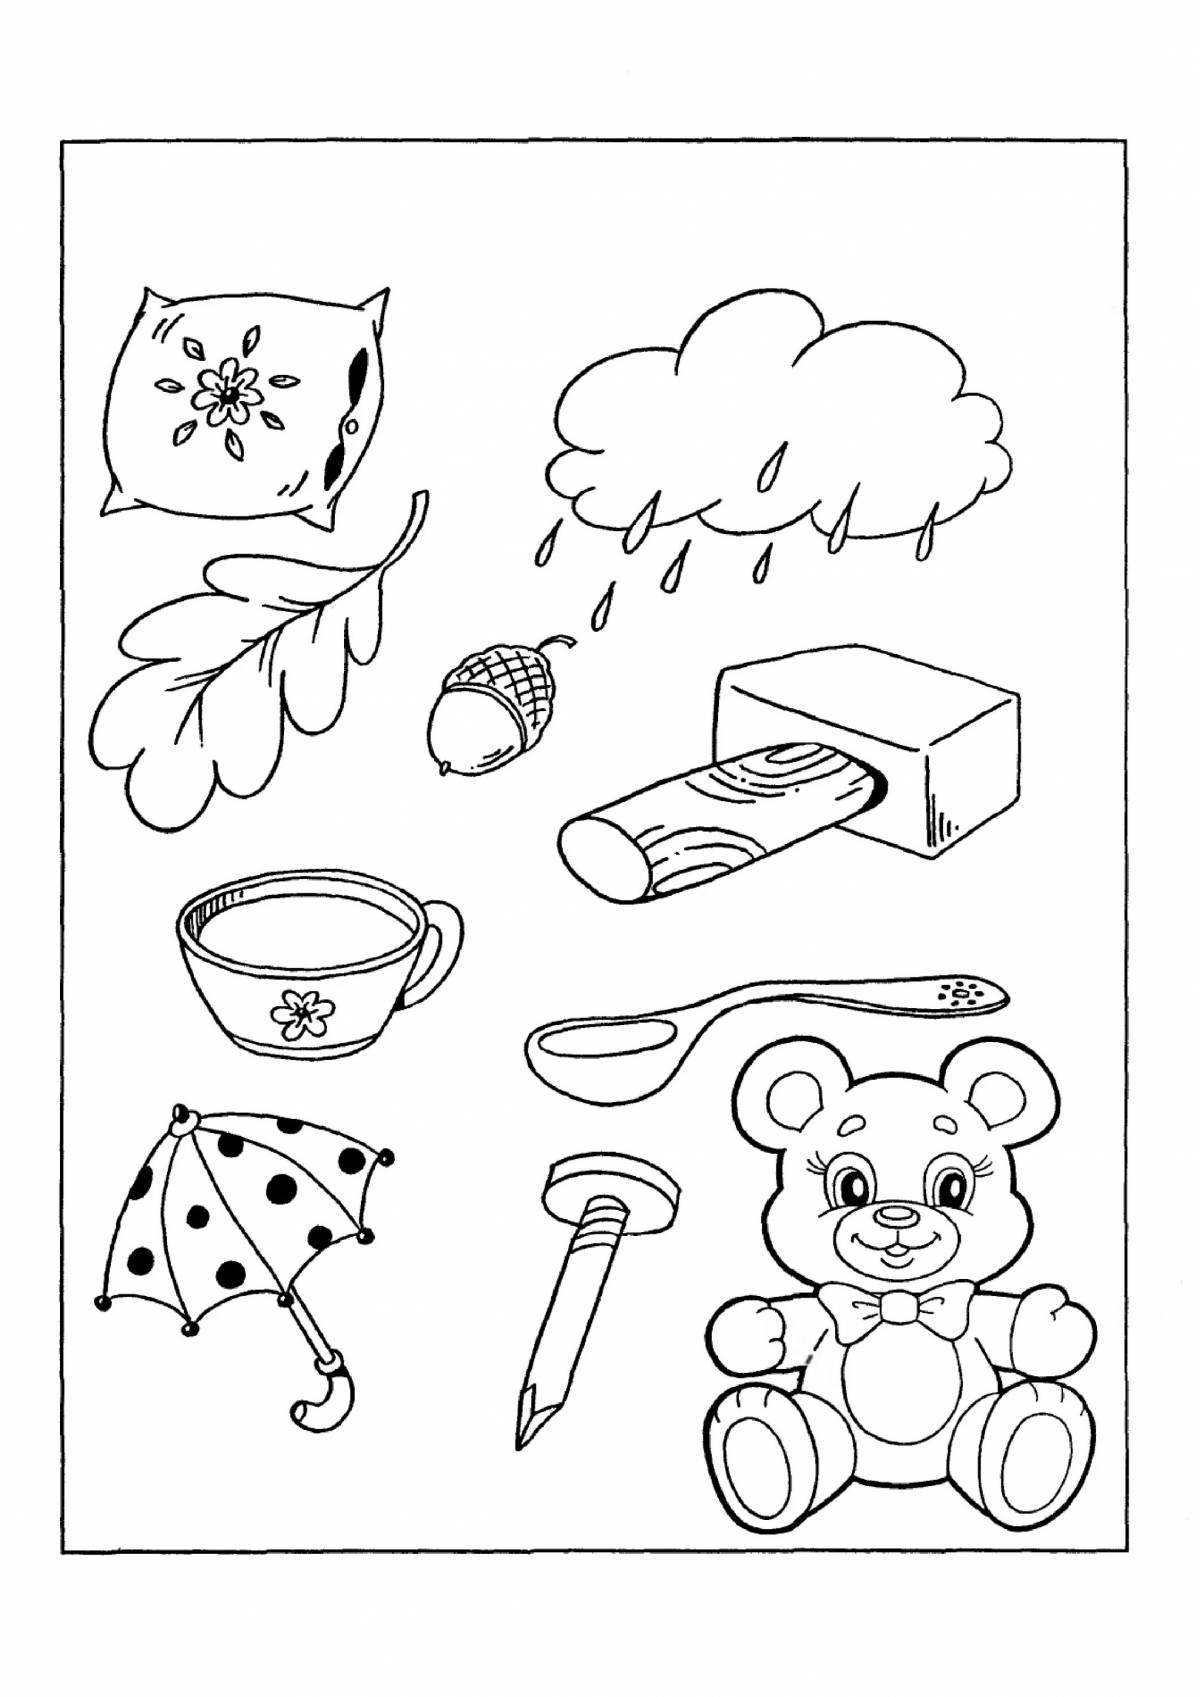 Fun coloring book for children 4 years old, developing